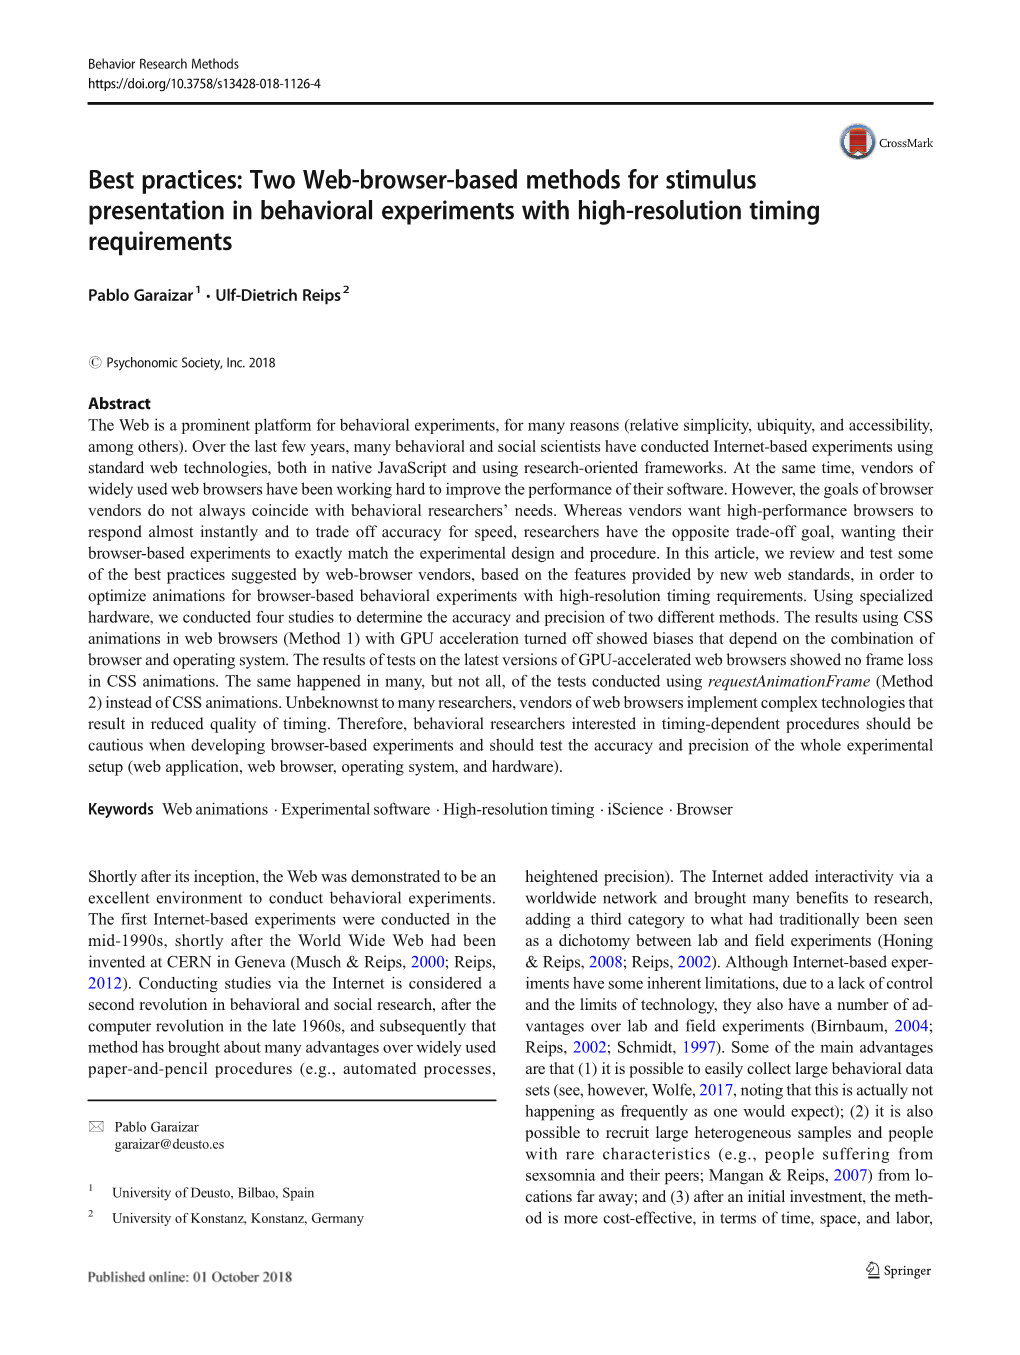 Two Web-Browser-Based Methods for Stimulus Presentation in Behavioral Experiments with High-Resolution Timing Requirements